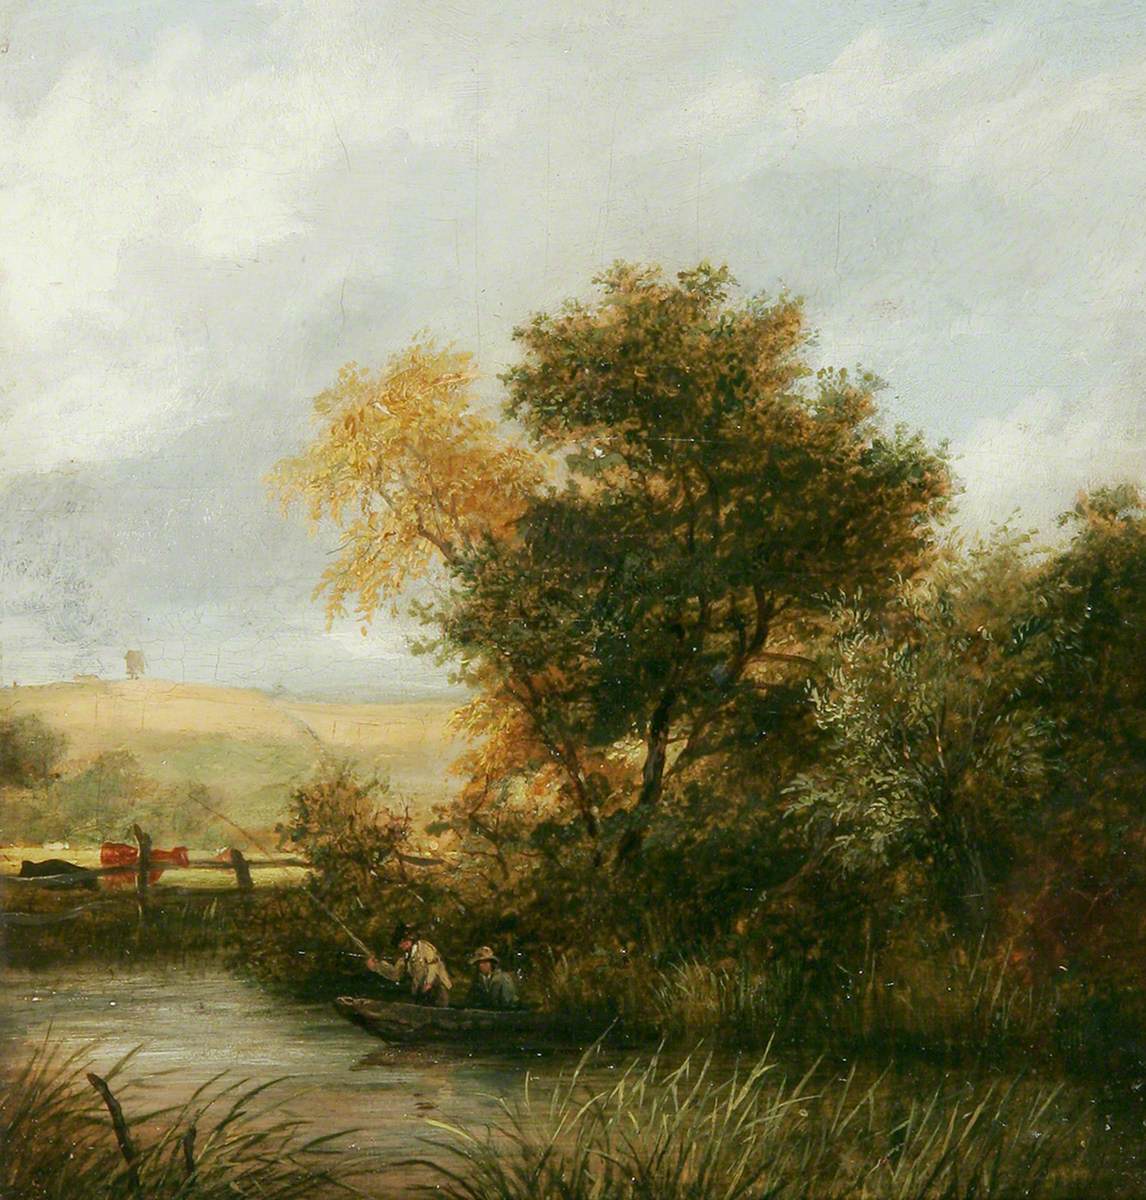 River Scene with Men Fishing from a Boat